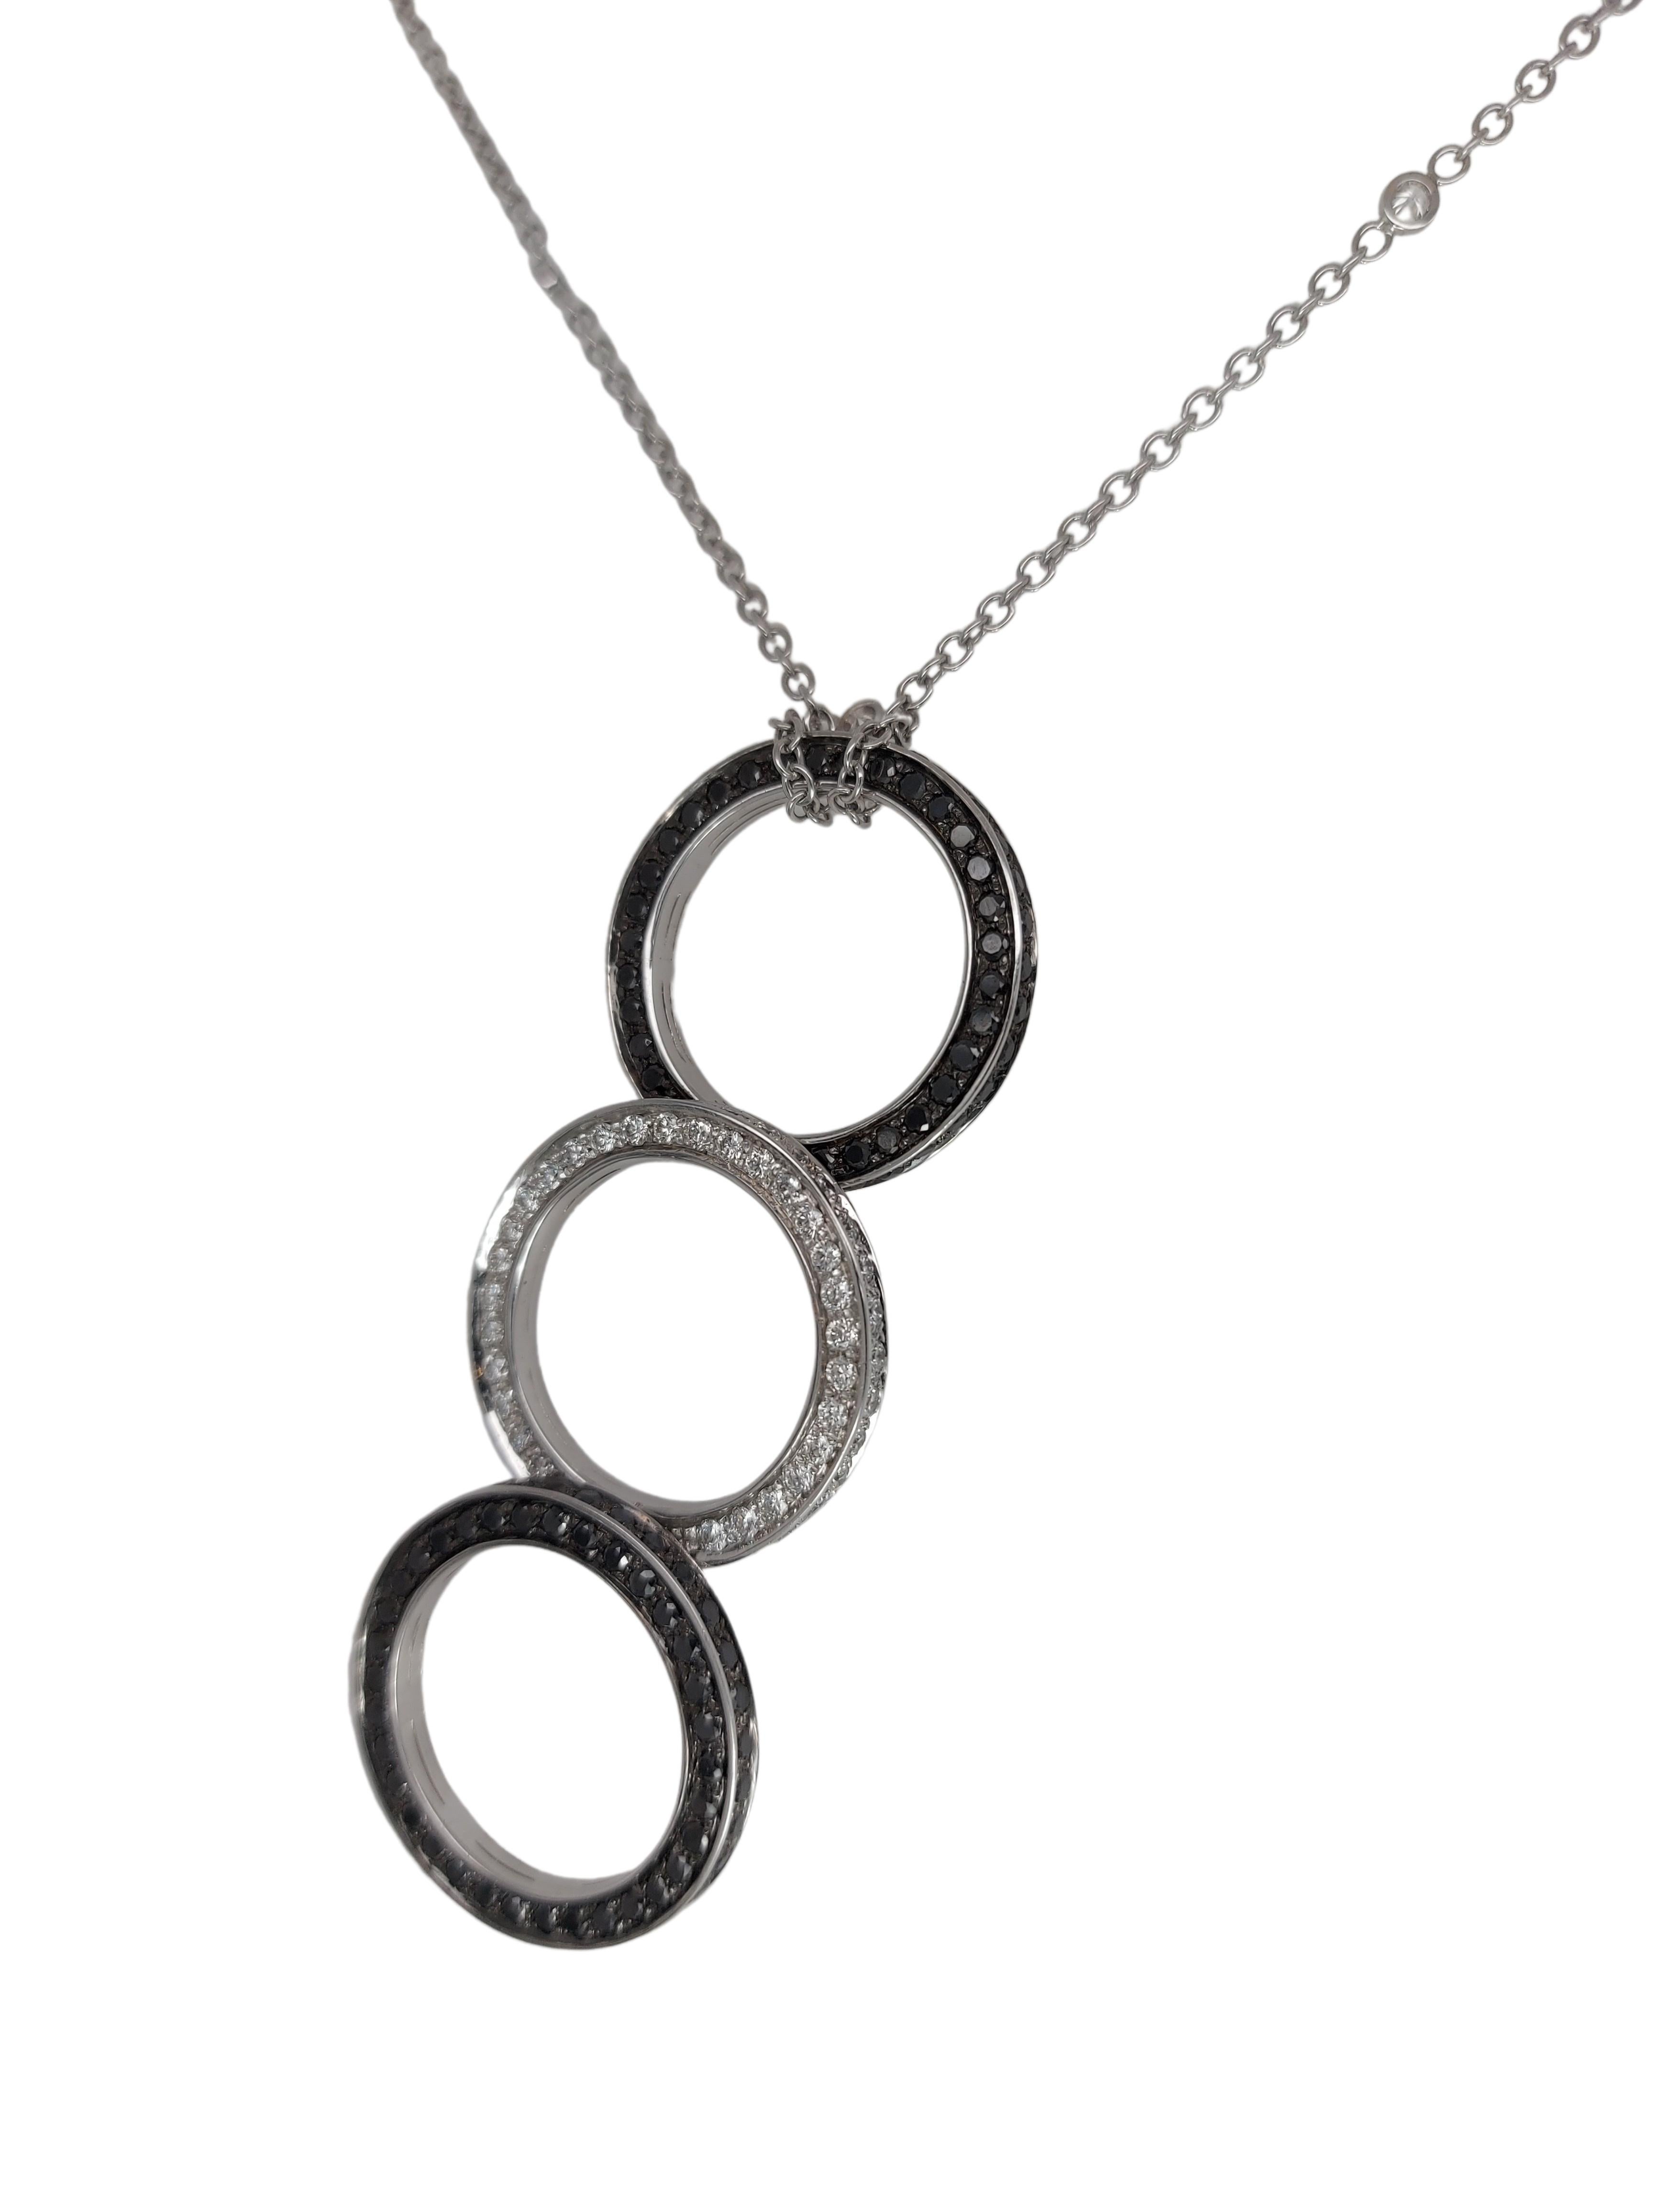 Very Unique and Special Necklace Pendant with Black and White Diamonds, Can be Transformed into a Triple Ring! 

Comes with a gorgeous 18kt white gold chain with 6 little diamonds 

Diamonds: Black diamonds and Brilliant cut white diamonds (all